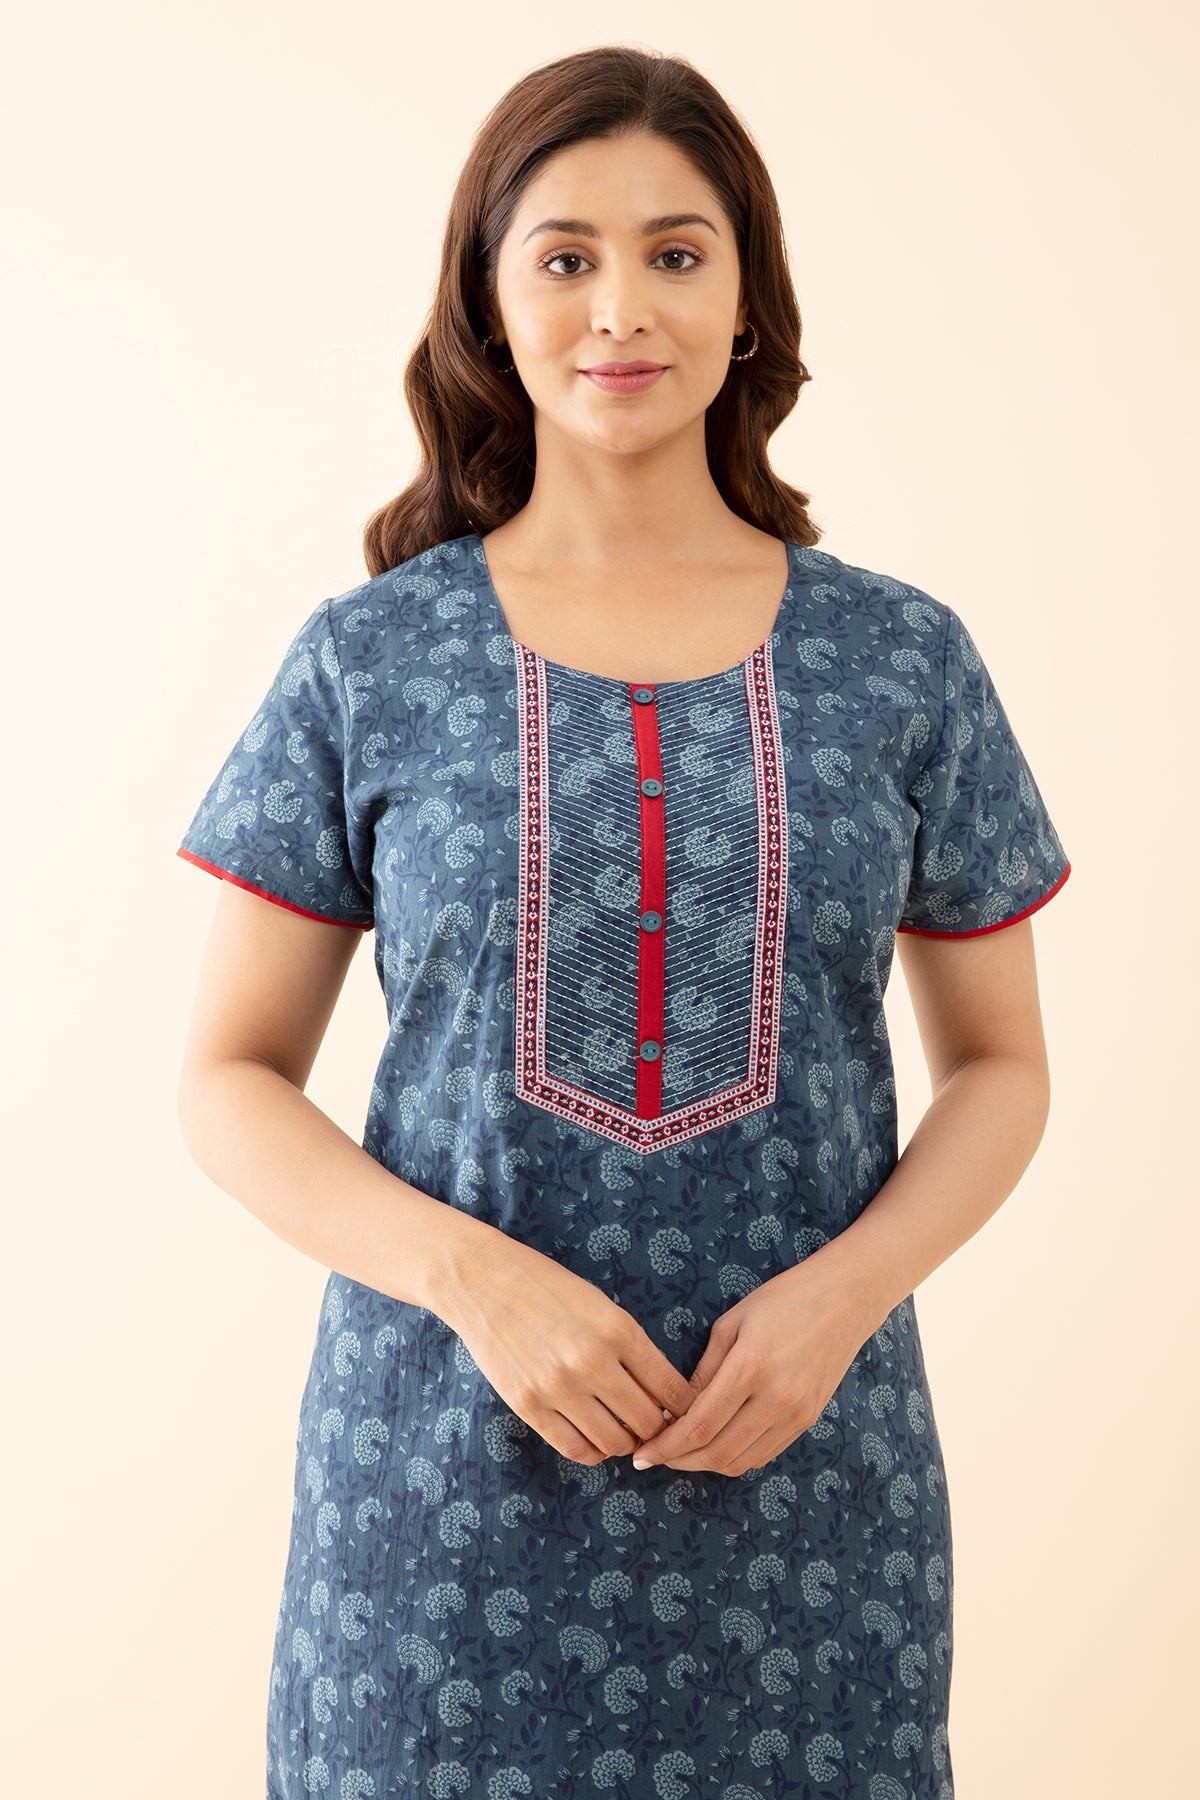 All Over Monochromatic Floral Printed Nighty with Embroidered Yoke Blue